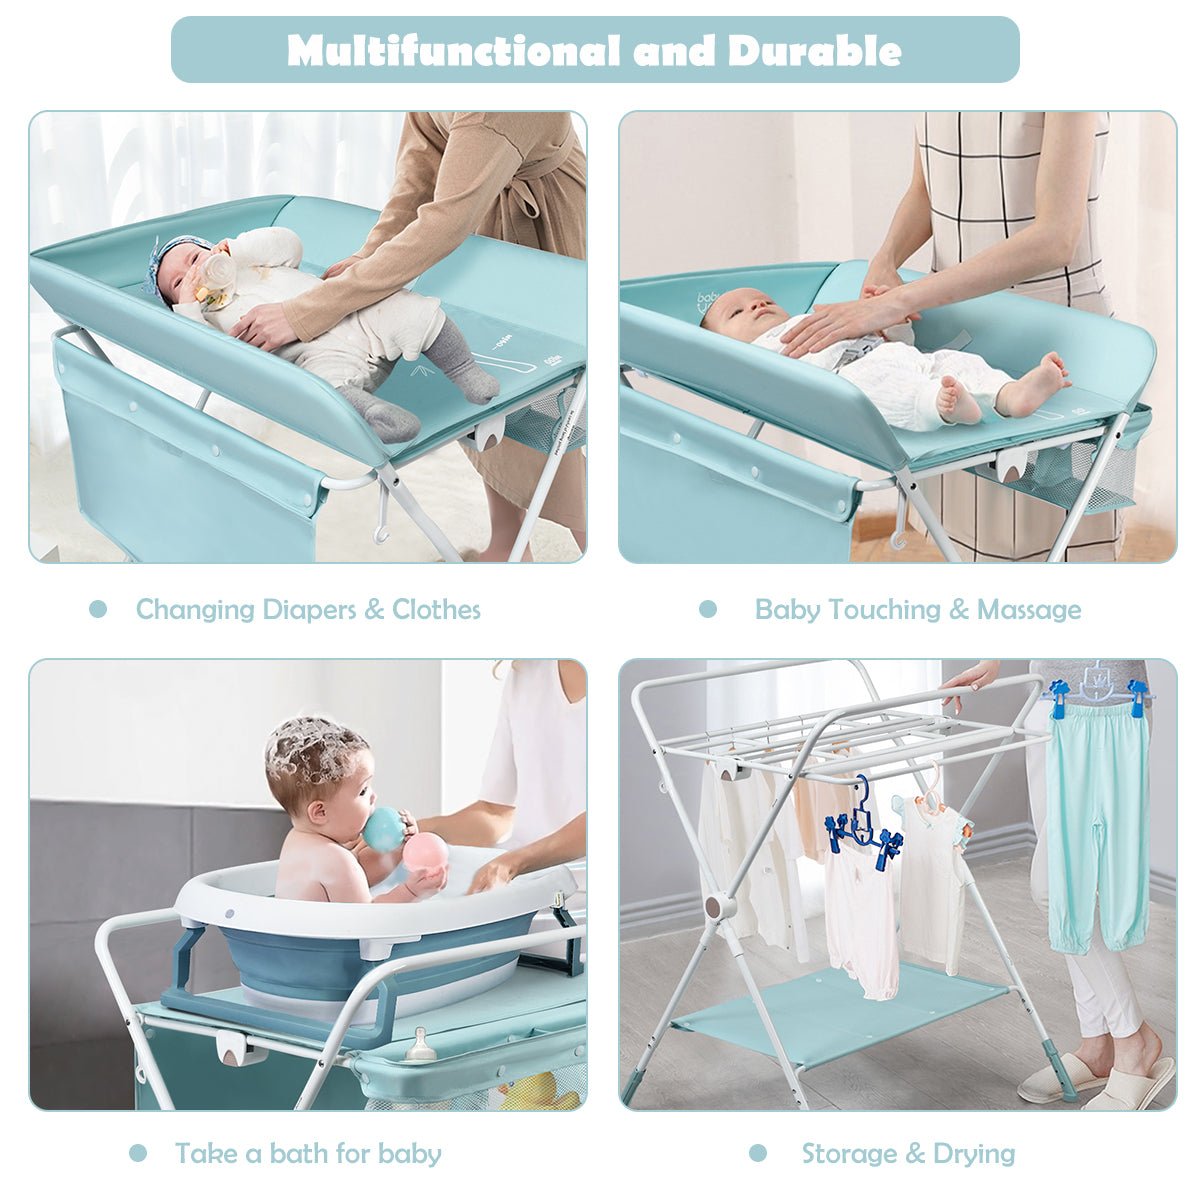 Multi-Purpose Diaper Changing Station - Portable Convenience with Adjustable Heights